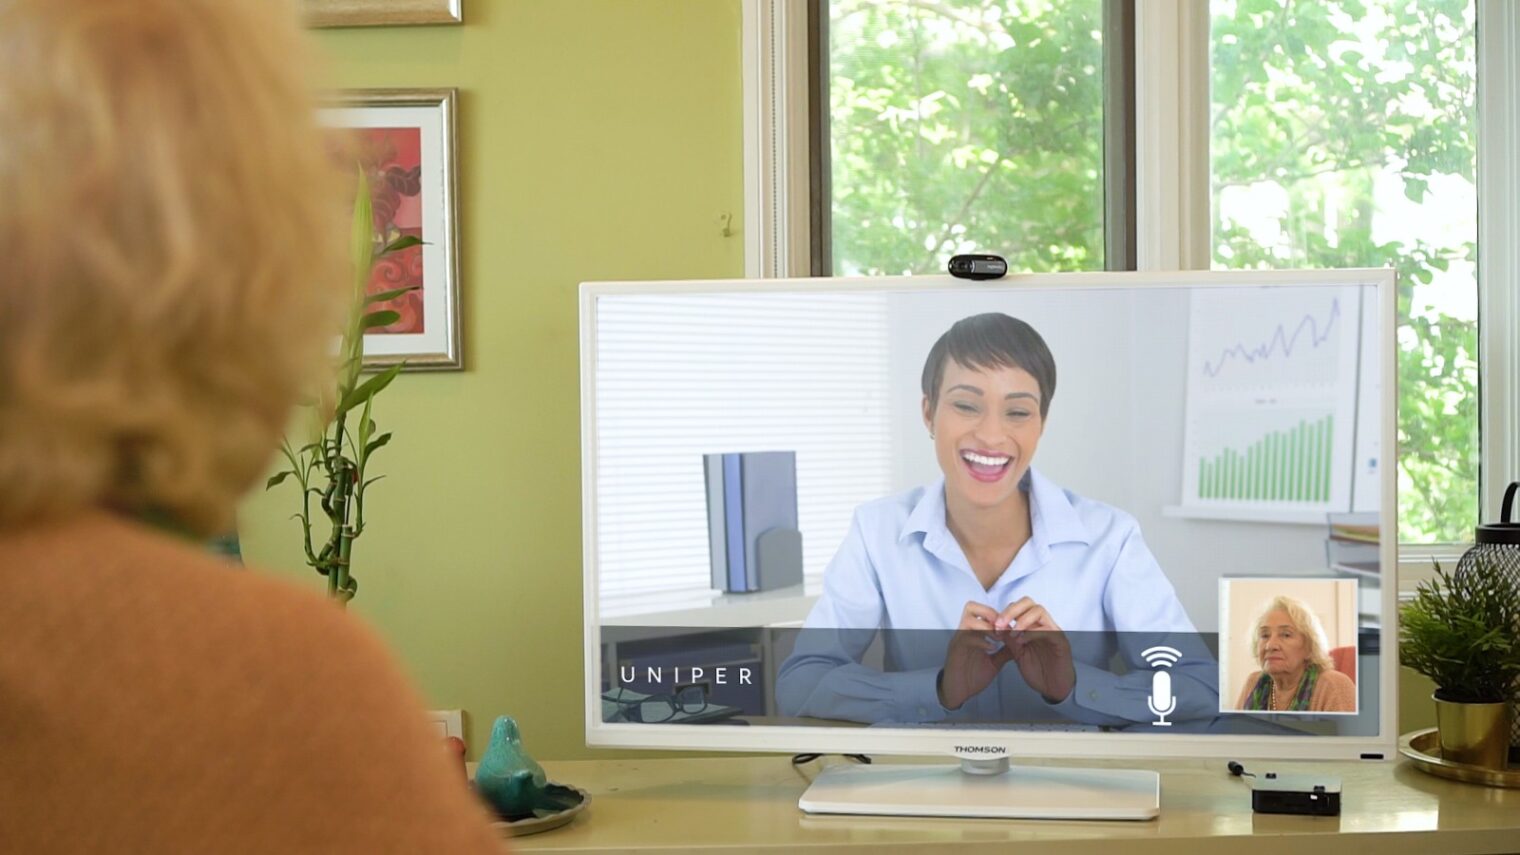 A Uniper Care user interacting with her physician through the television. Photo: courtesy